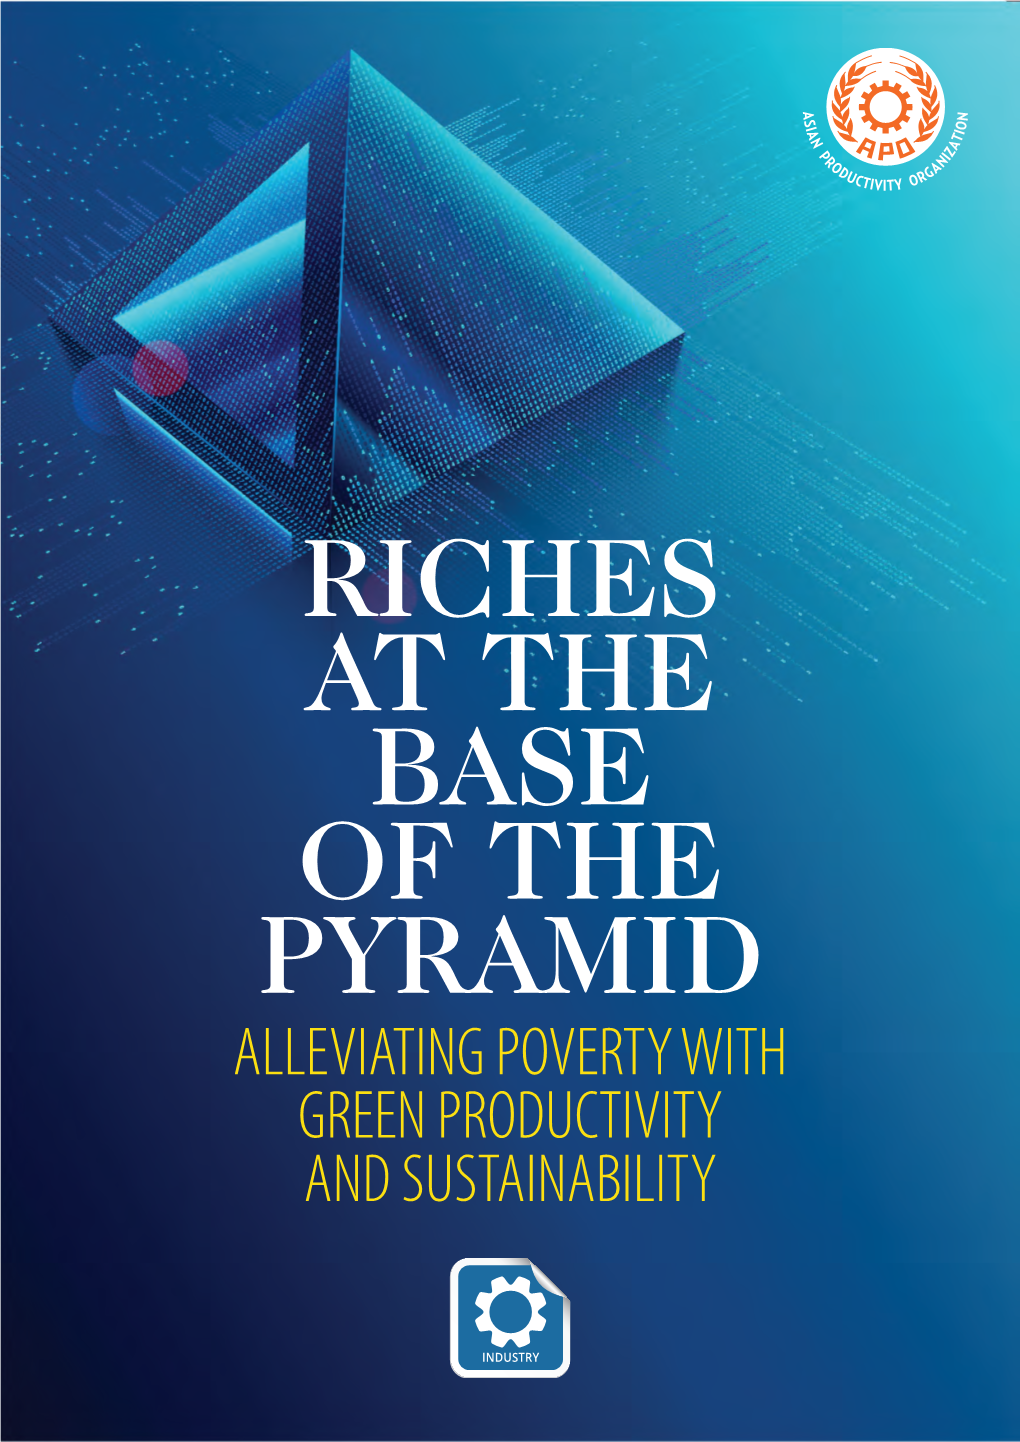 Riches at the Base of the Pyramid Alleviating Poverty with Green Productivity and Sustainability